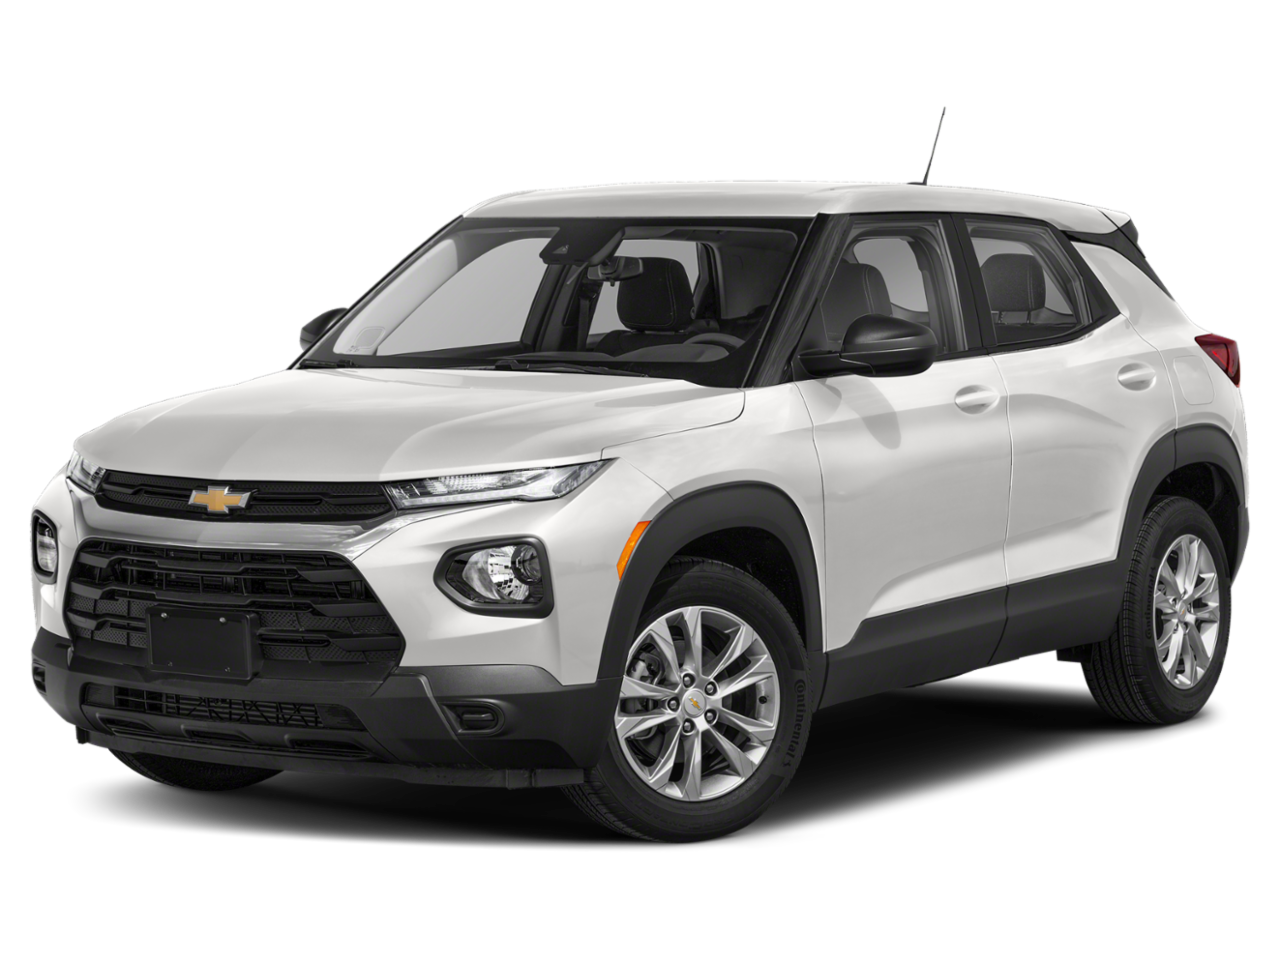 New Chevrolet Trailblazer from your Great Falls, MT dealership, City